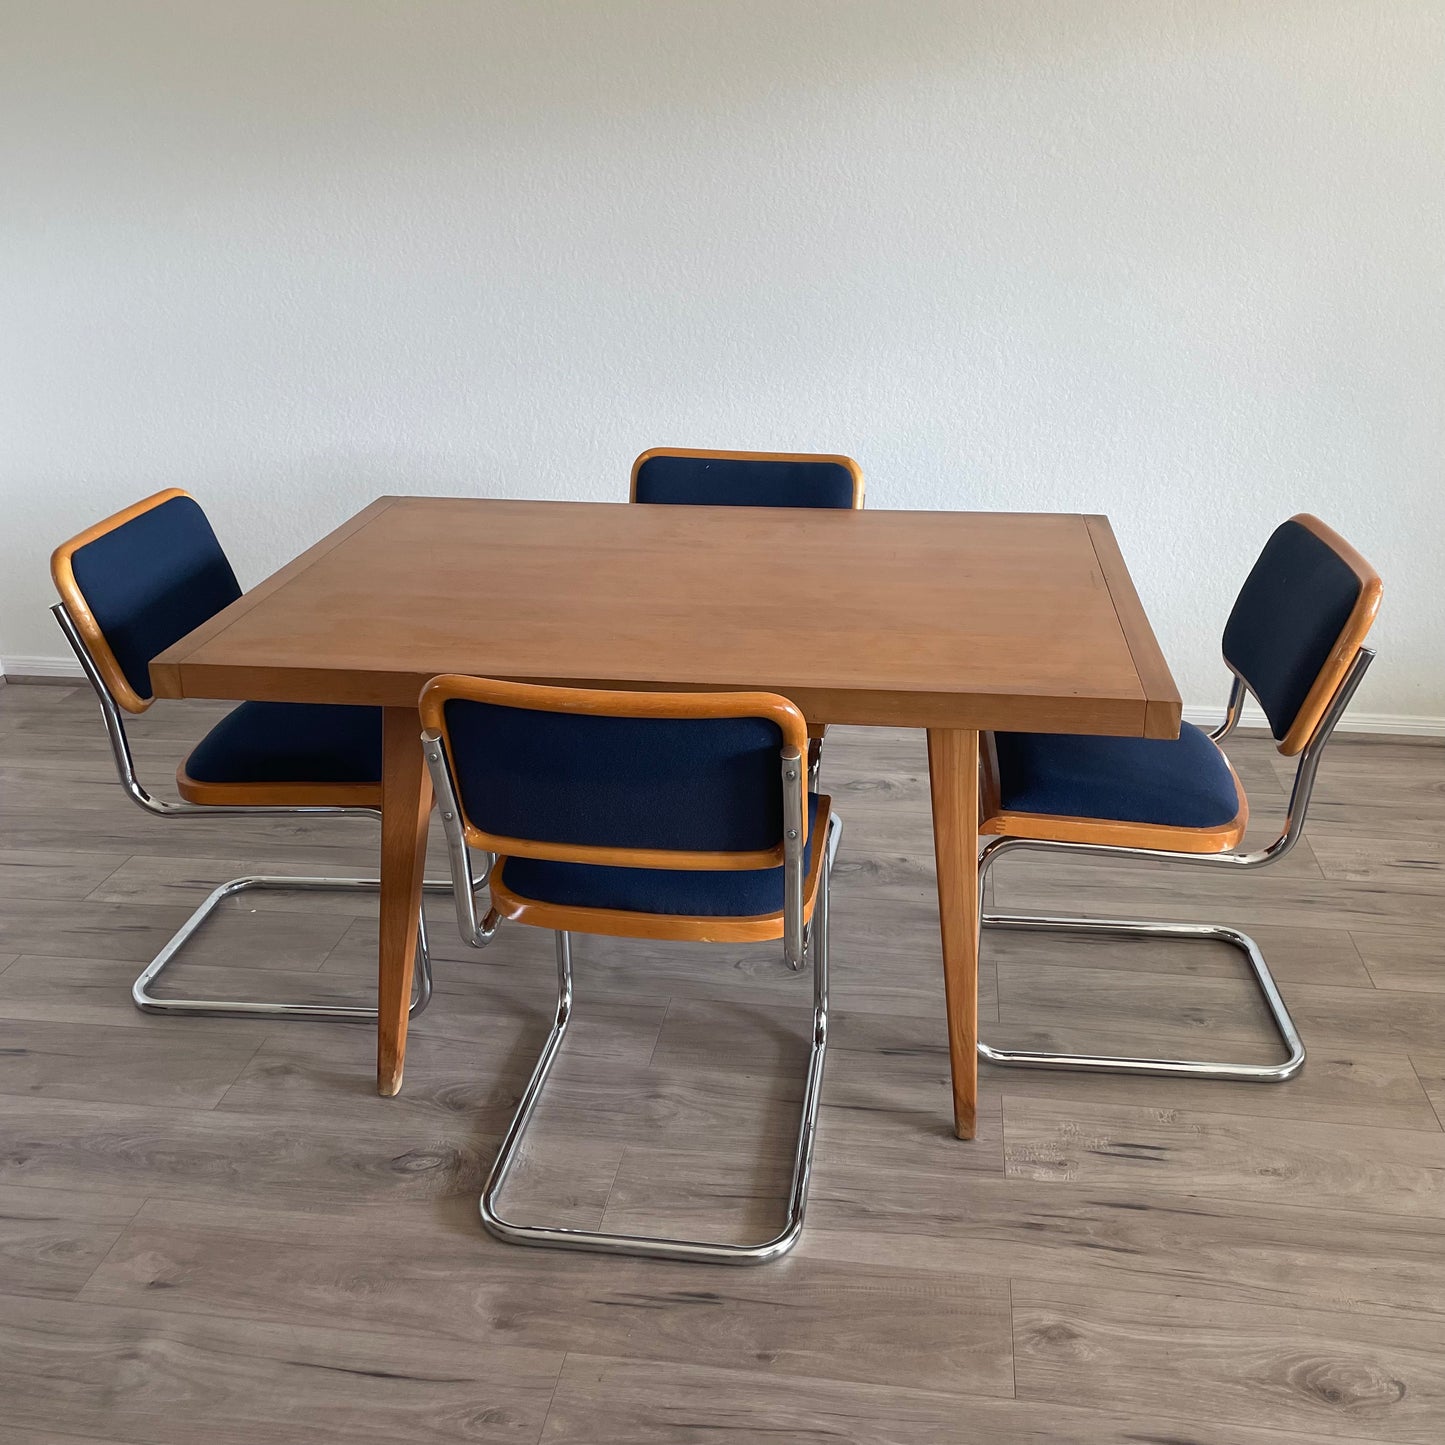 Vintage Mcm Dining Table - Extendable